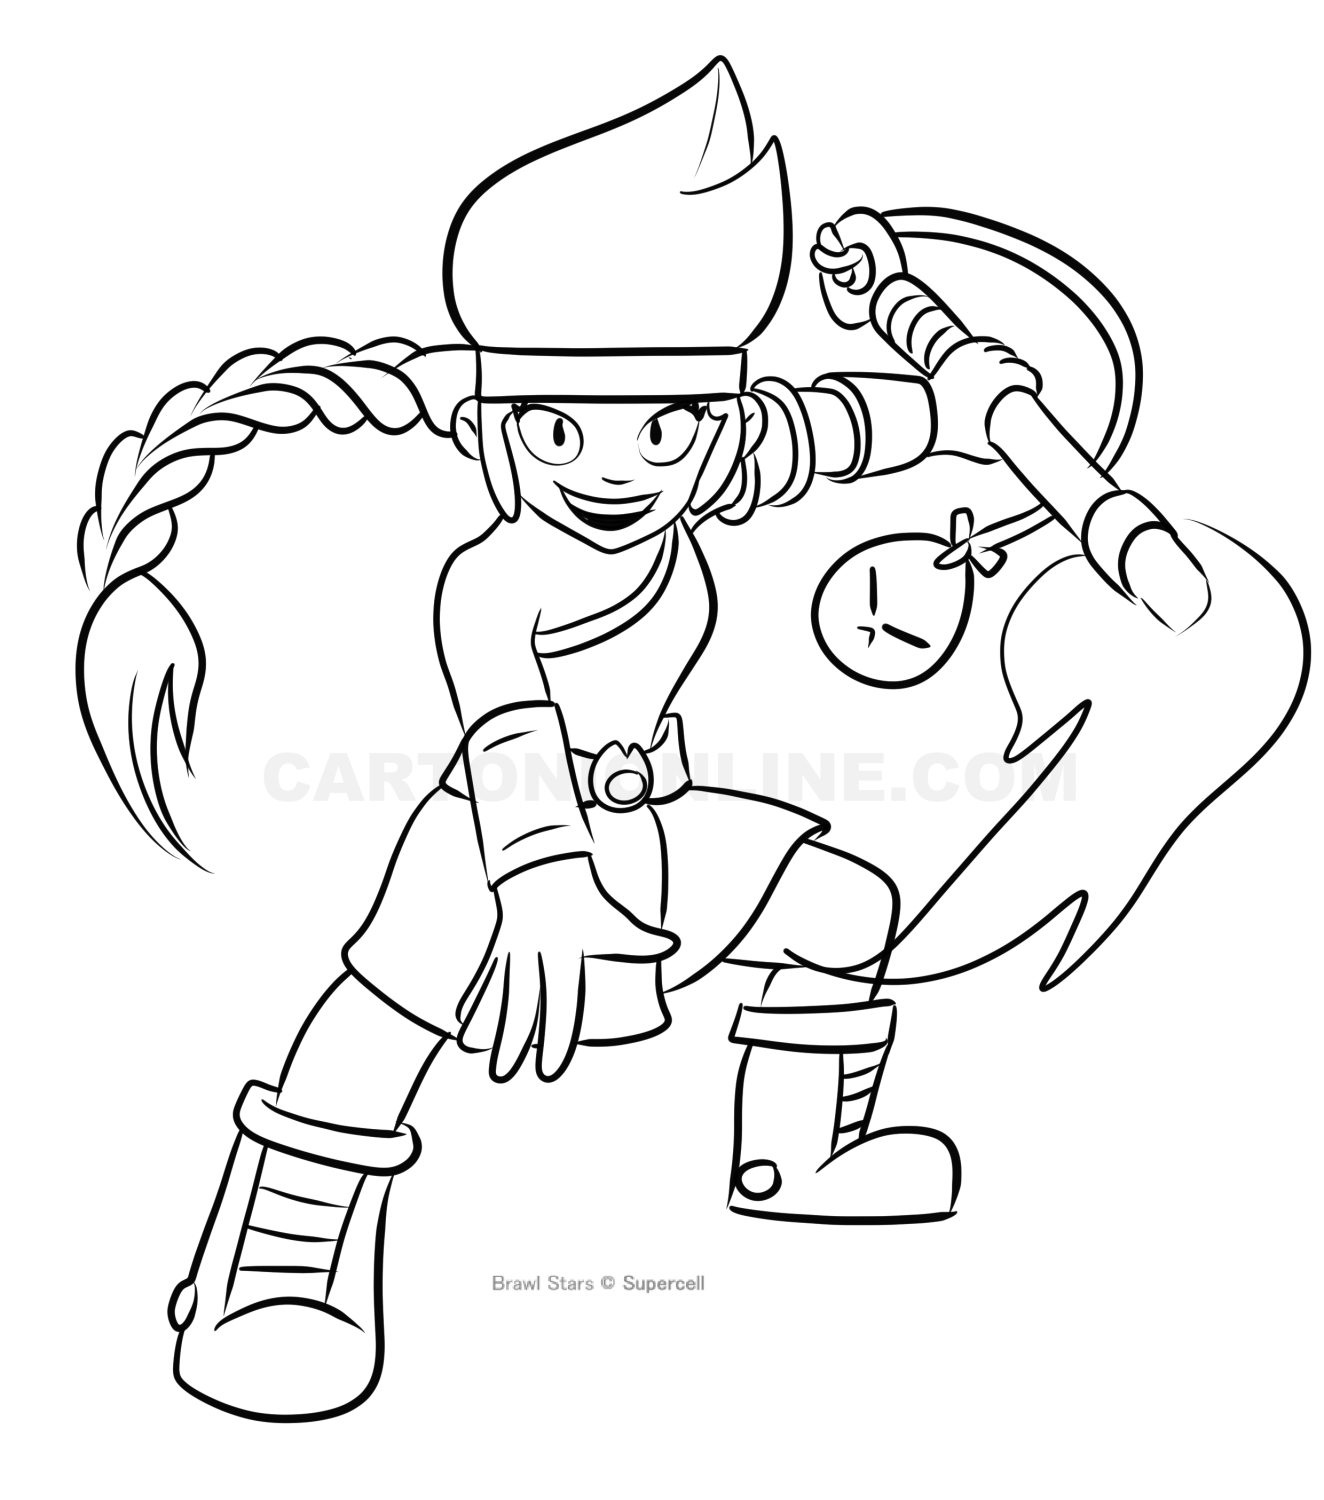 Amber 03 from Brawl Stars coloring page